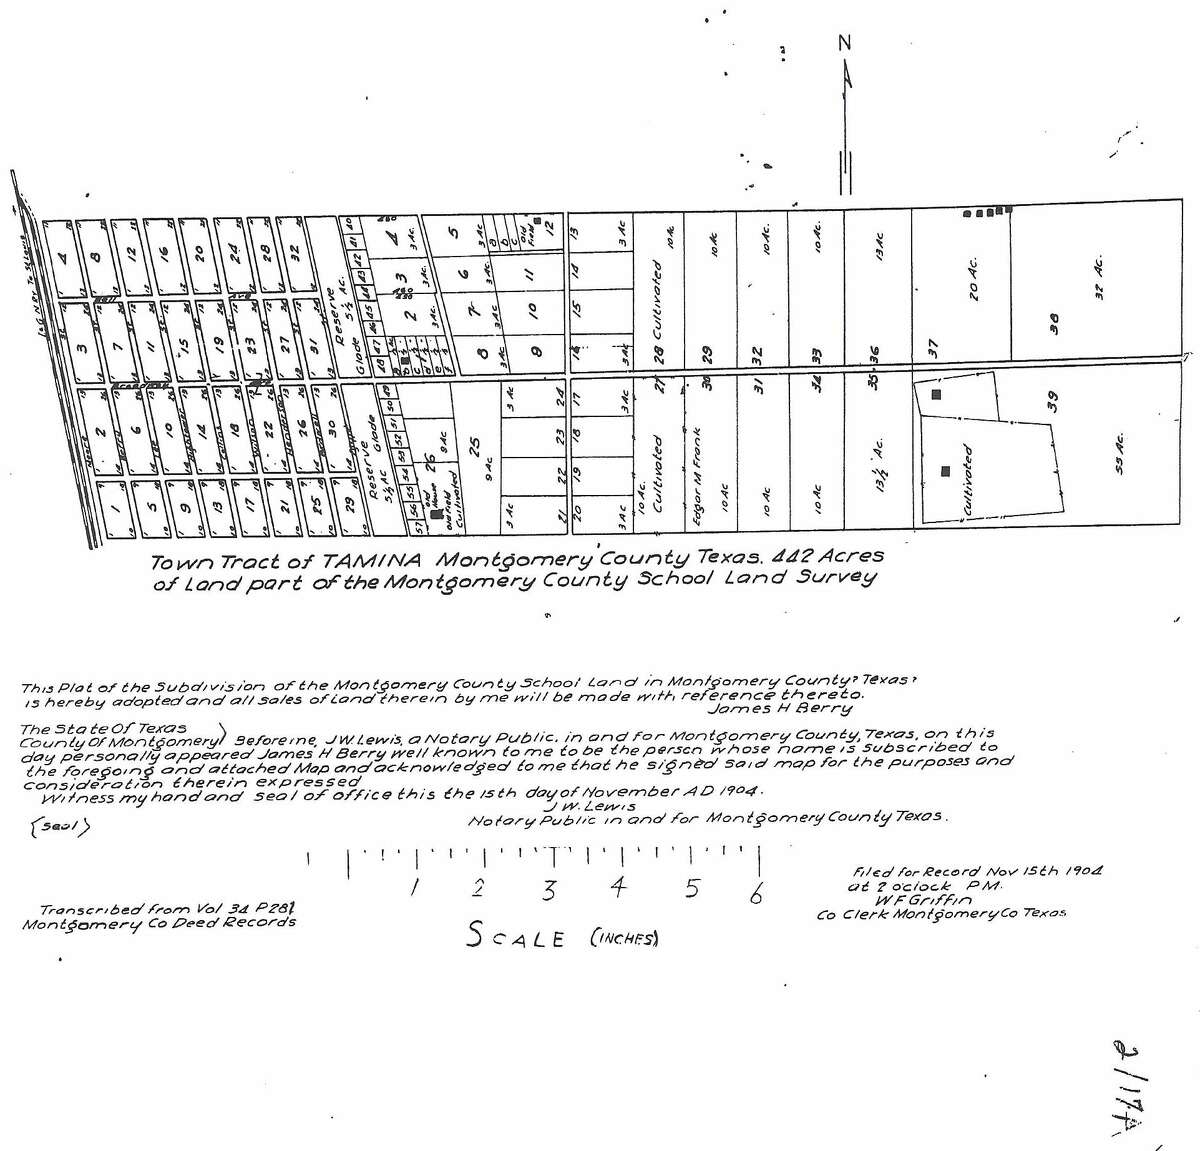 The town tract for the town of Tamina. This rendering was filed with the county in November 1904.